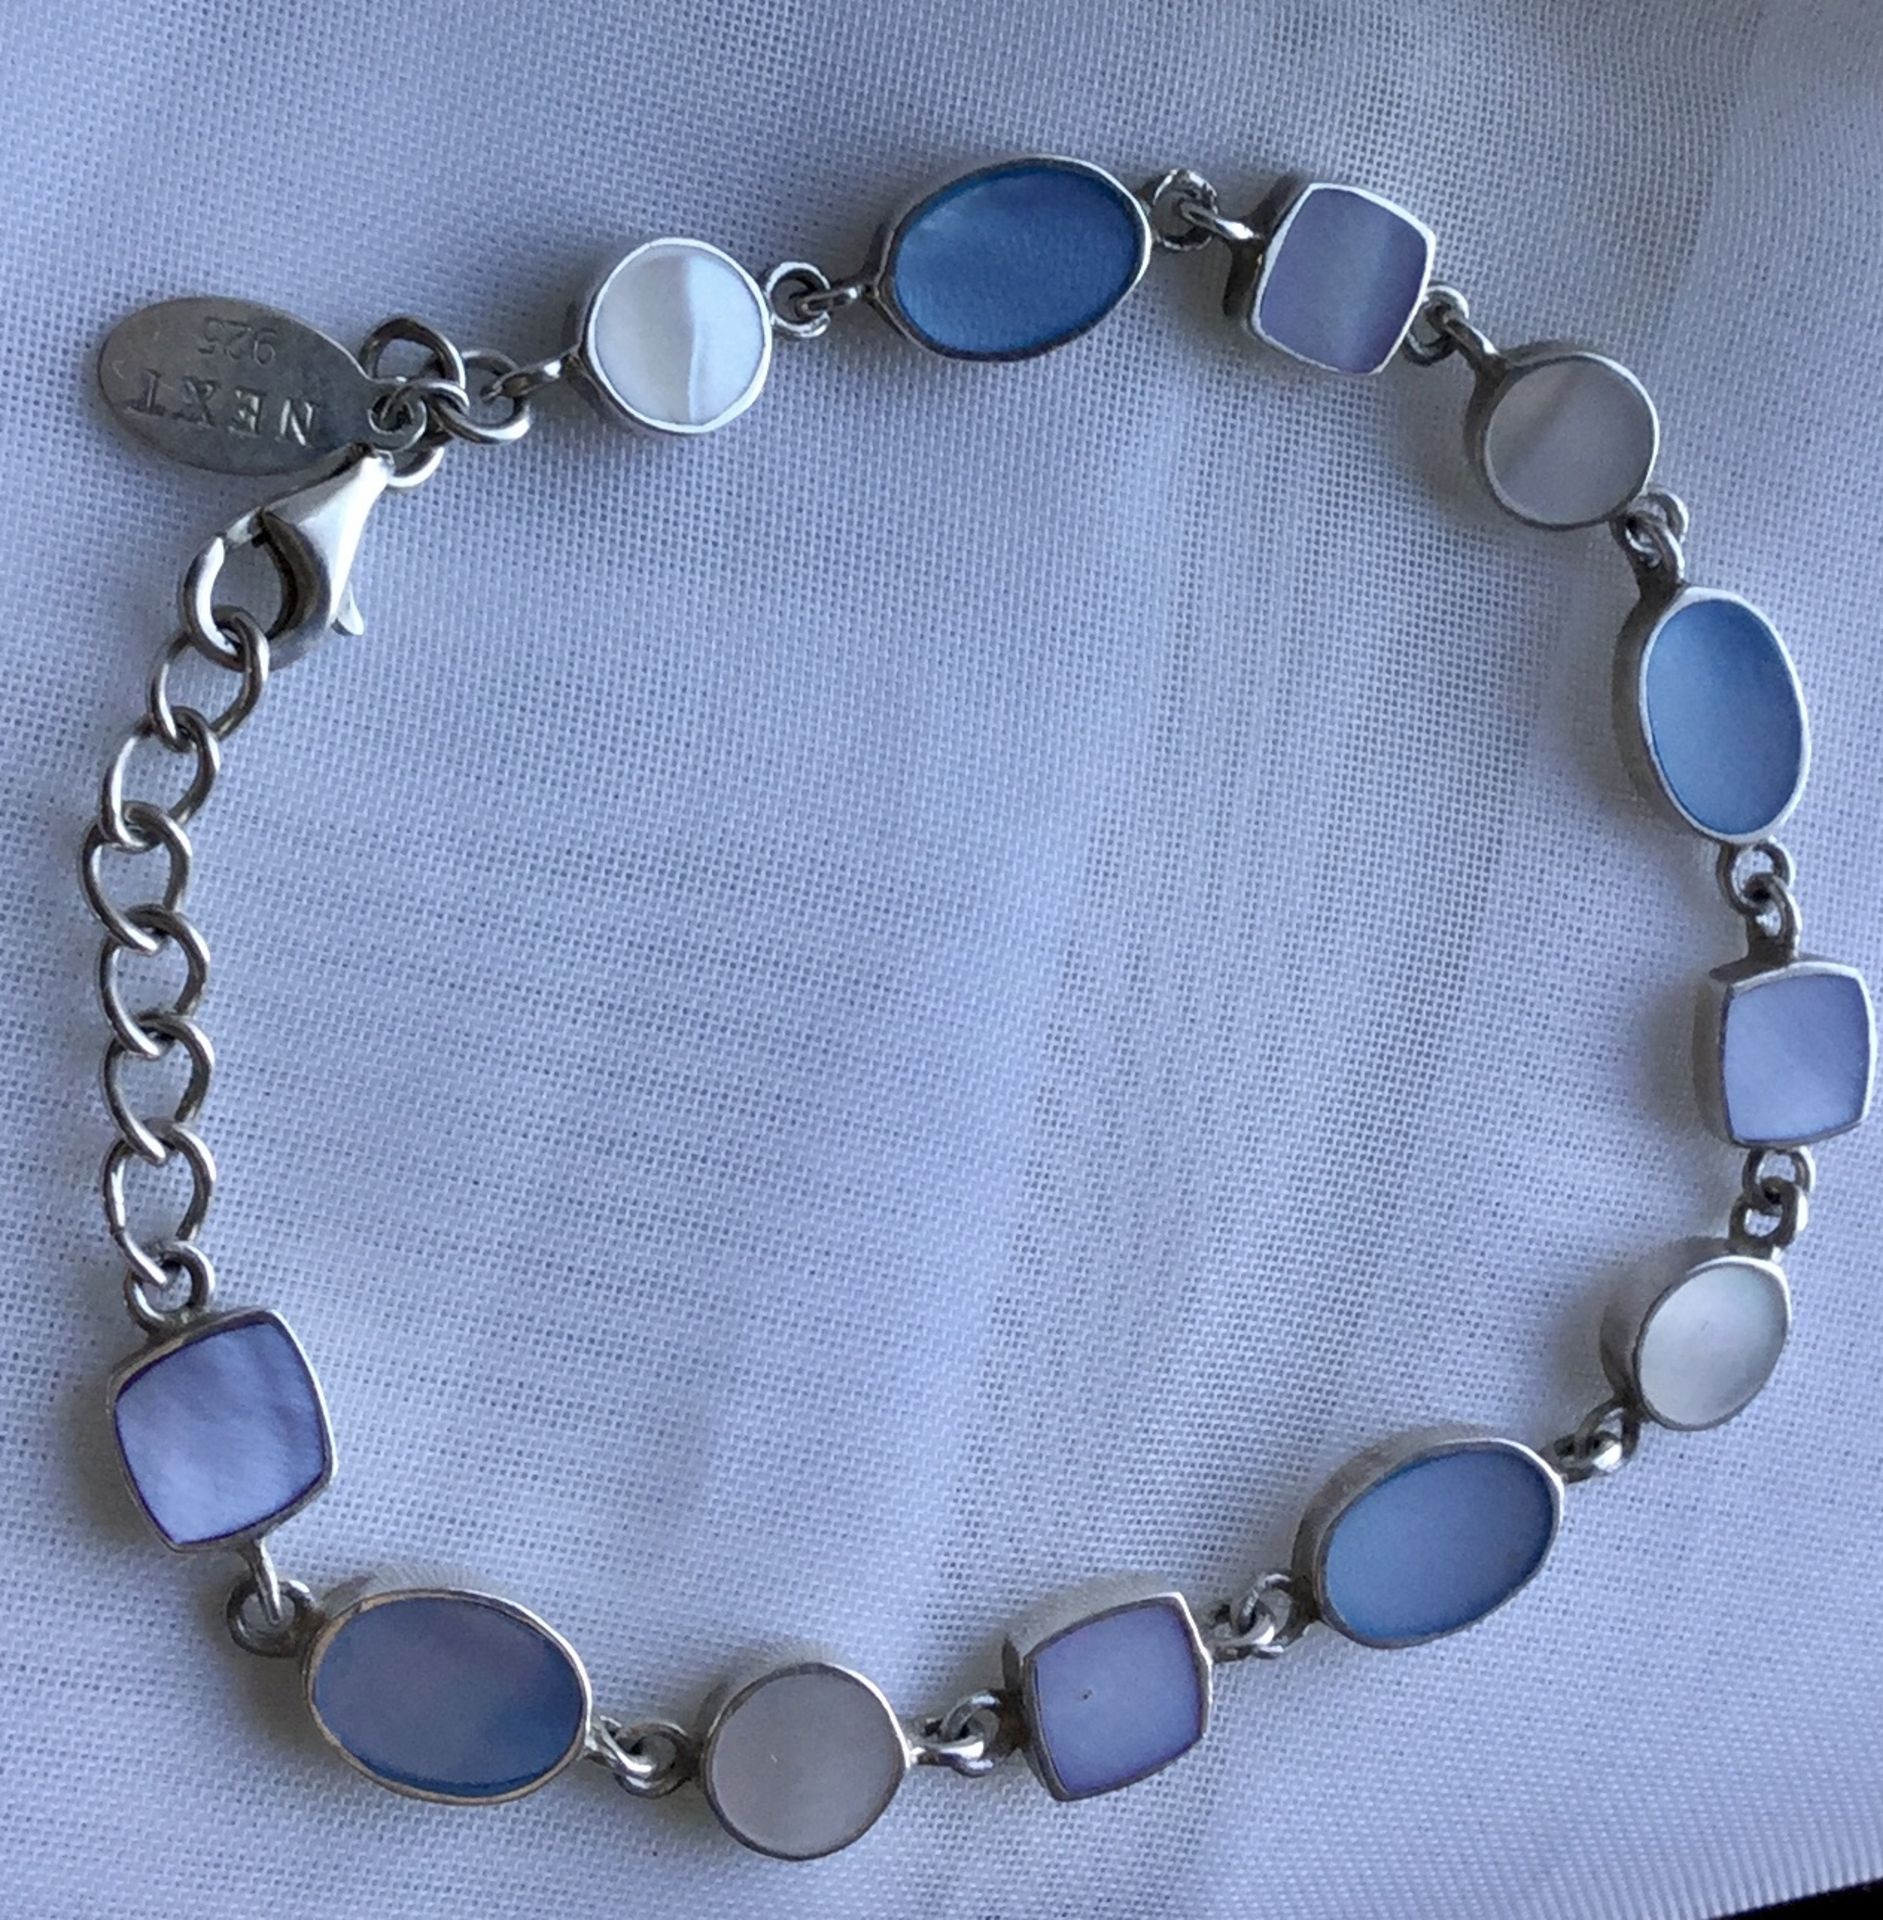 Silver Mother of Pearl Bracelet 7” - Image 8 of 8